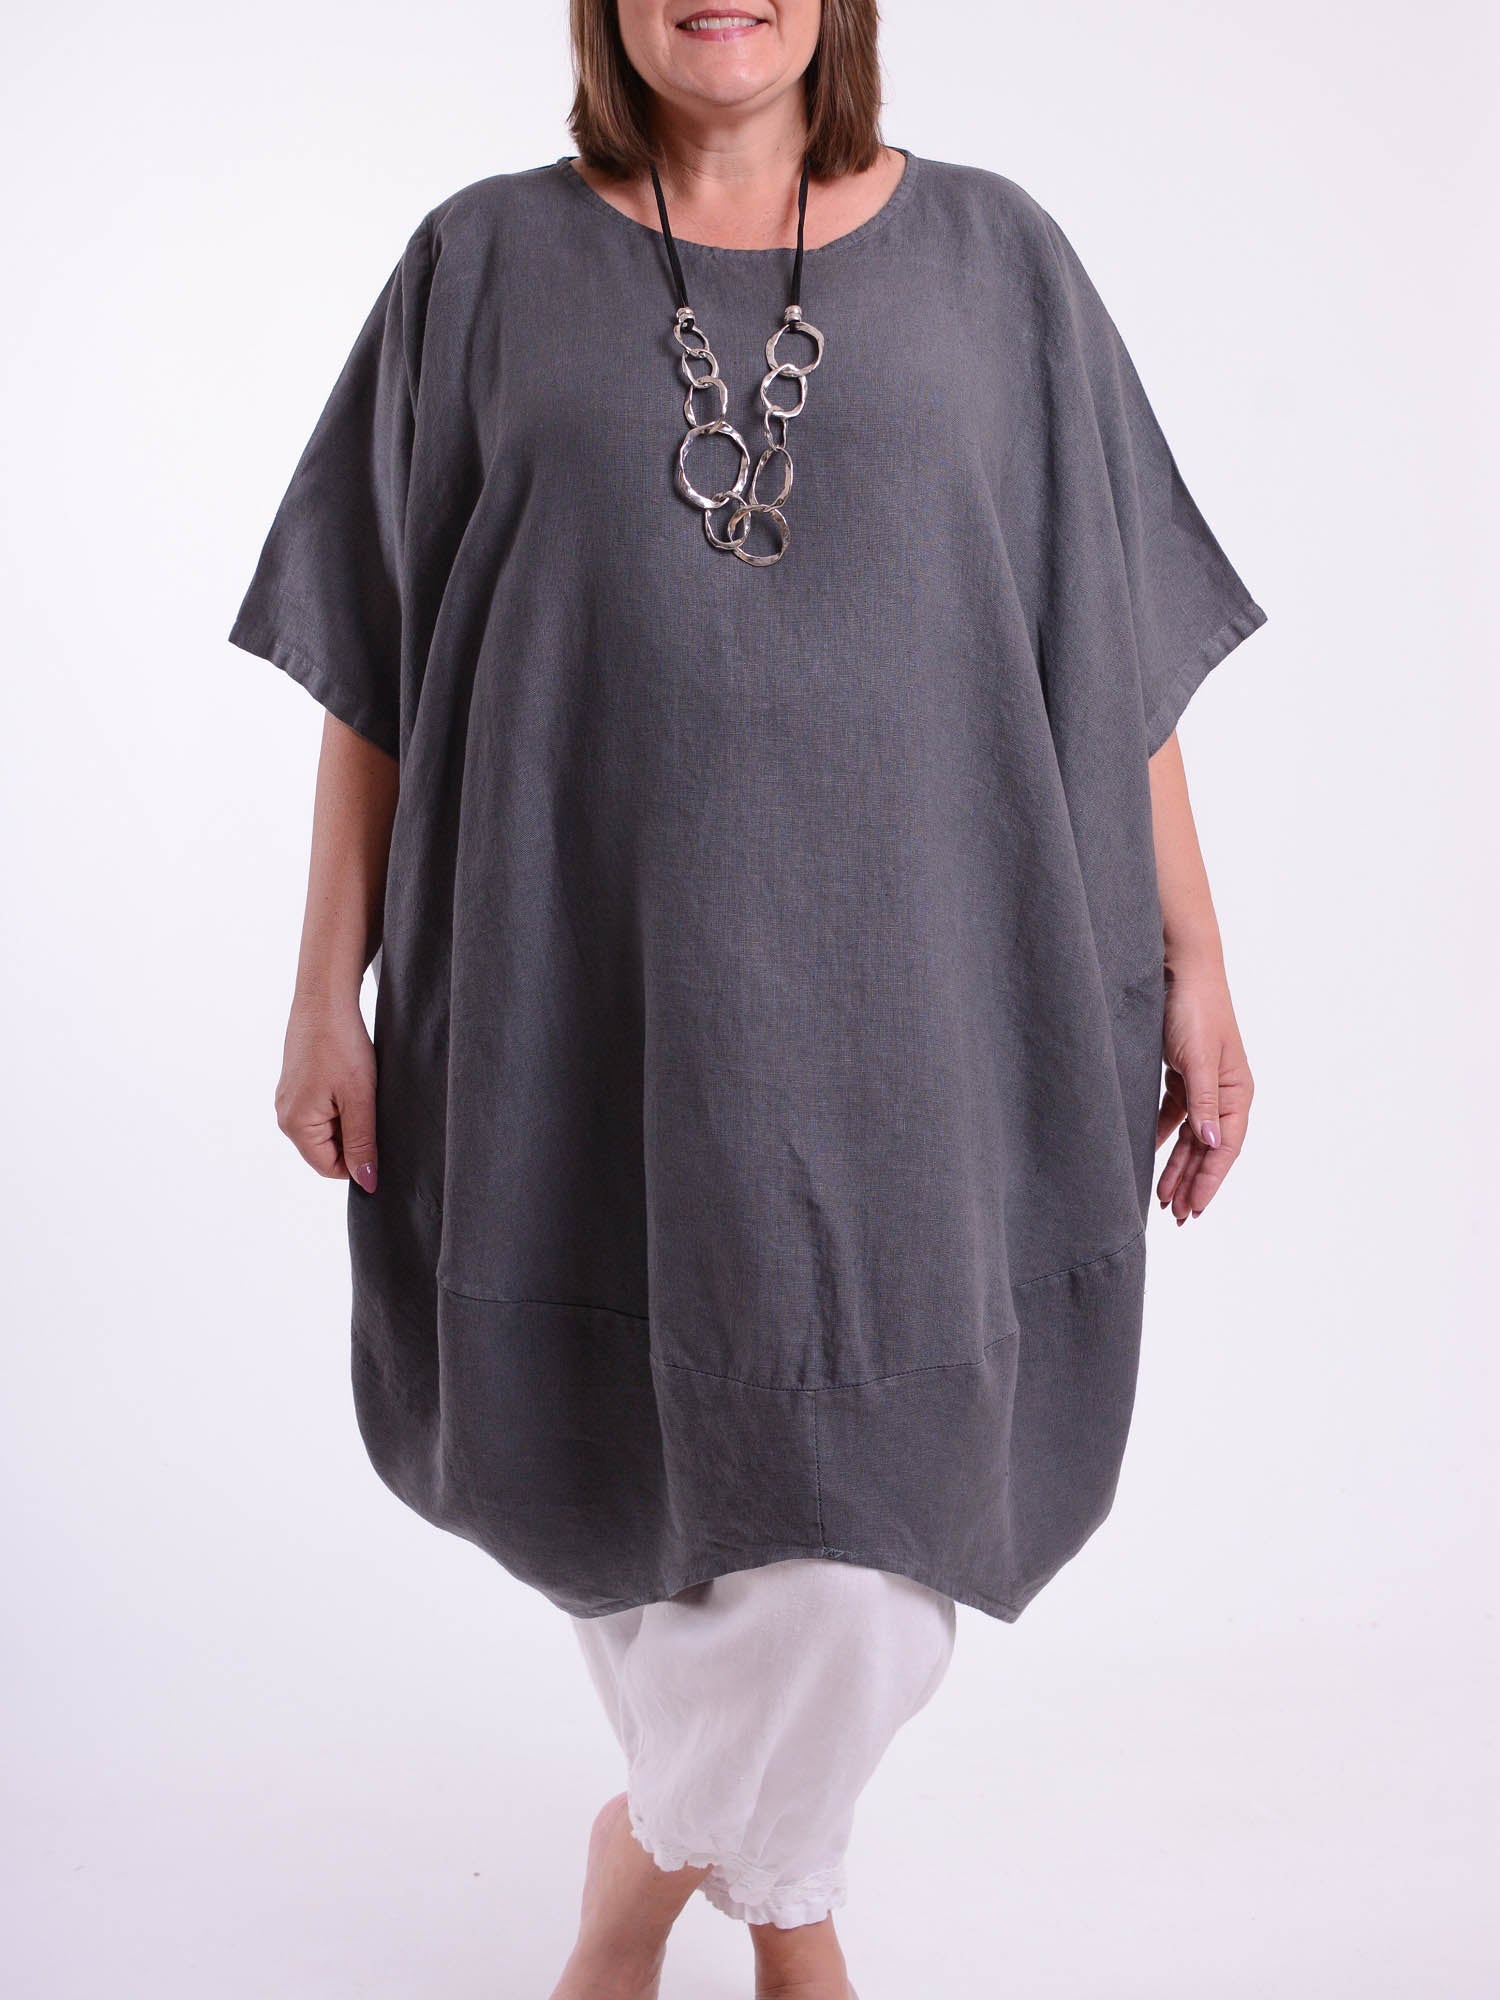 Lagenlook Linen Cocoon Dress - 9811, Dresses, Pure Plus Clothing, Lagenlook Clothing, Plus Size Fashion, Over 50 Fashion